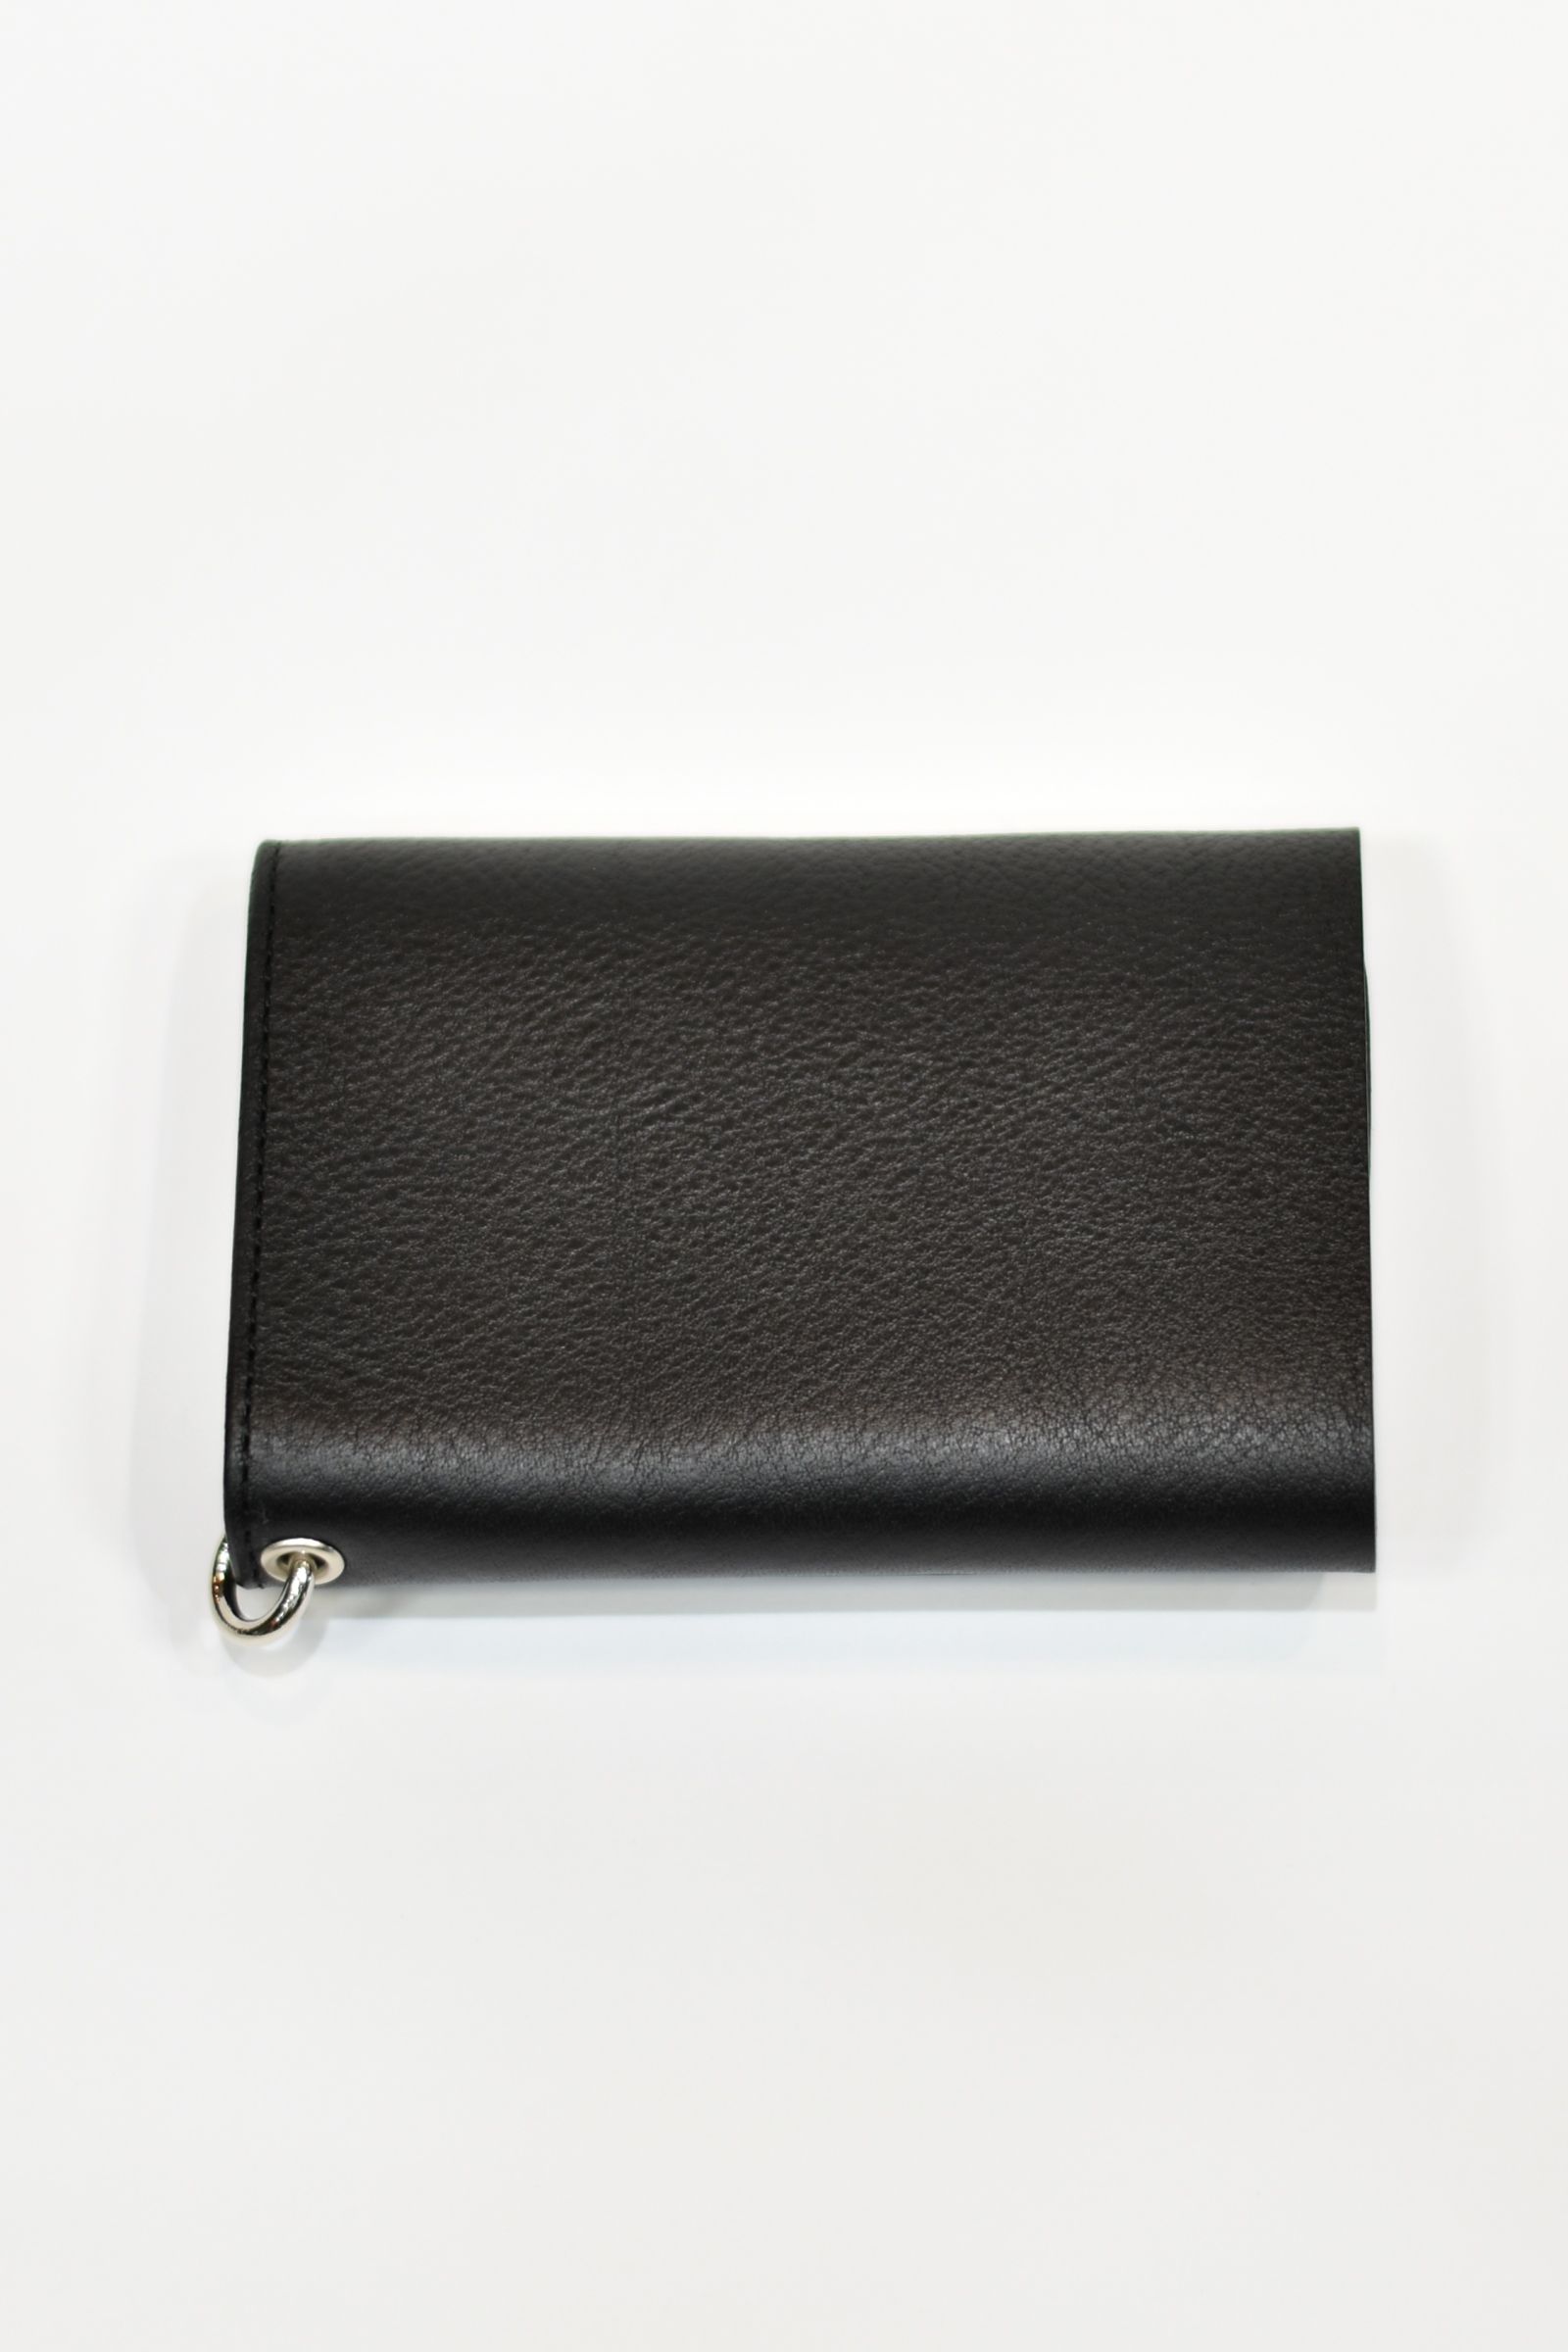 CALEE - SILVER STAR CONCHO FLAP LEATHER HALF WALLET (BLACK